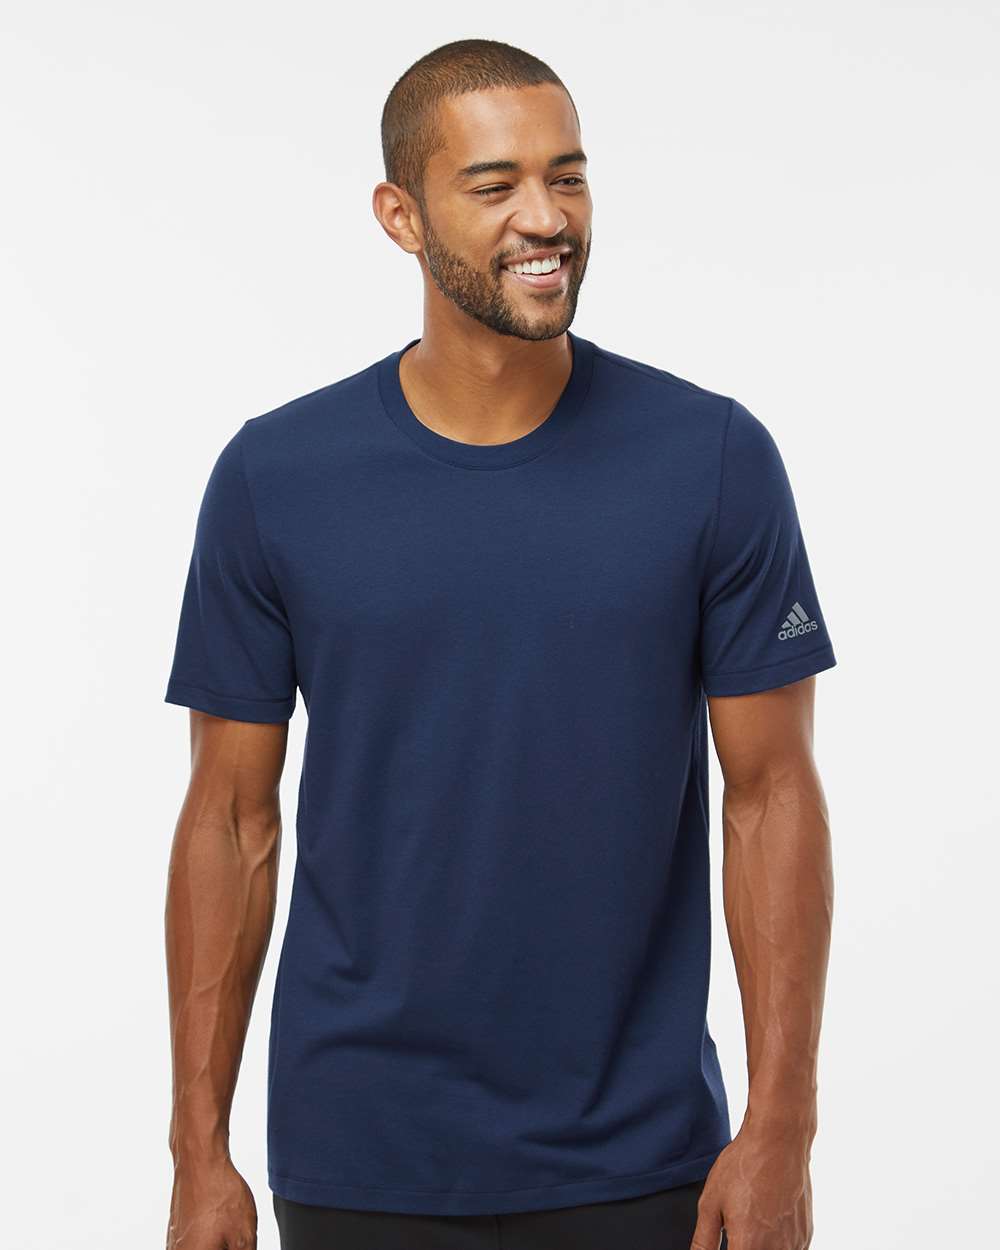 Adidas A556 Blended T-Shirt #colormdl_Collegiate Navy